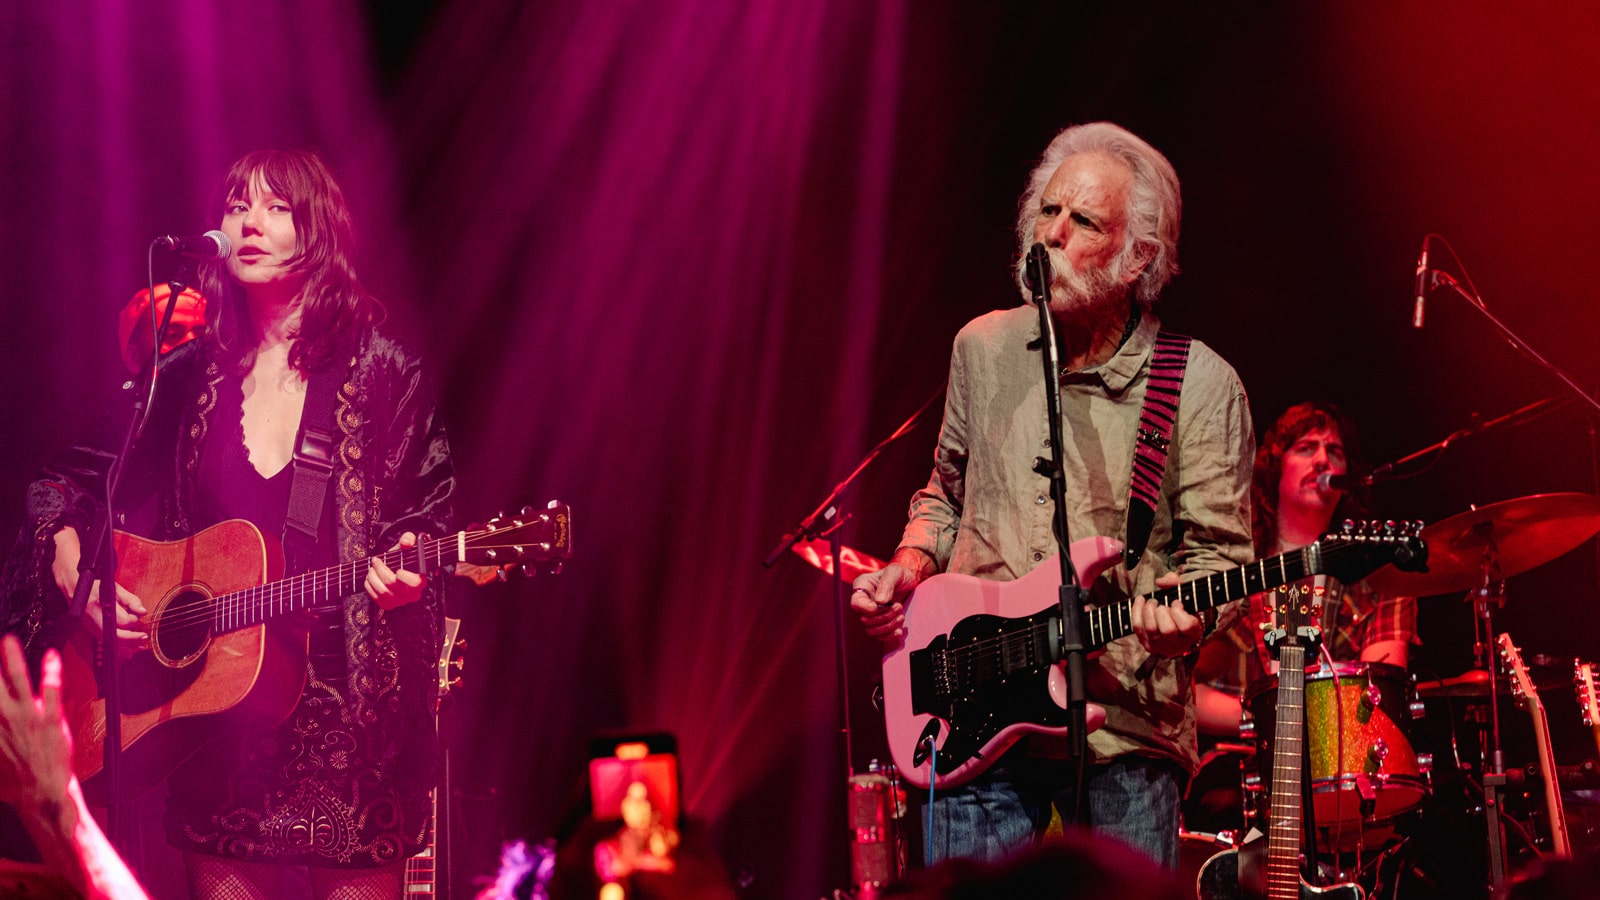 (L-R) Molly Tuttle and Bobby Weir